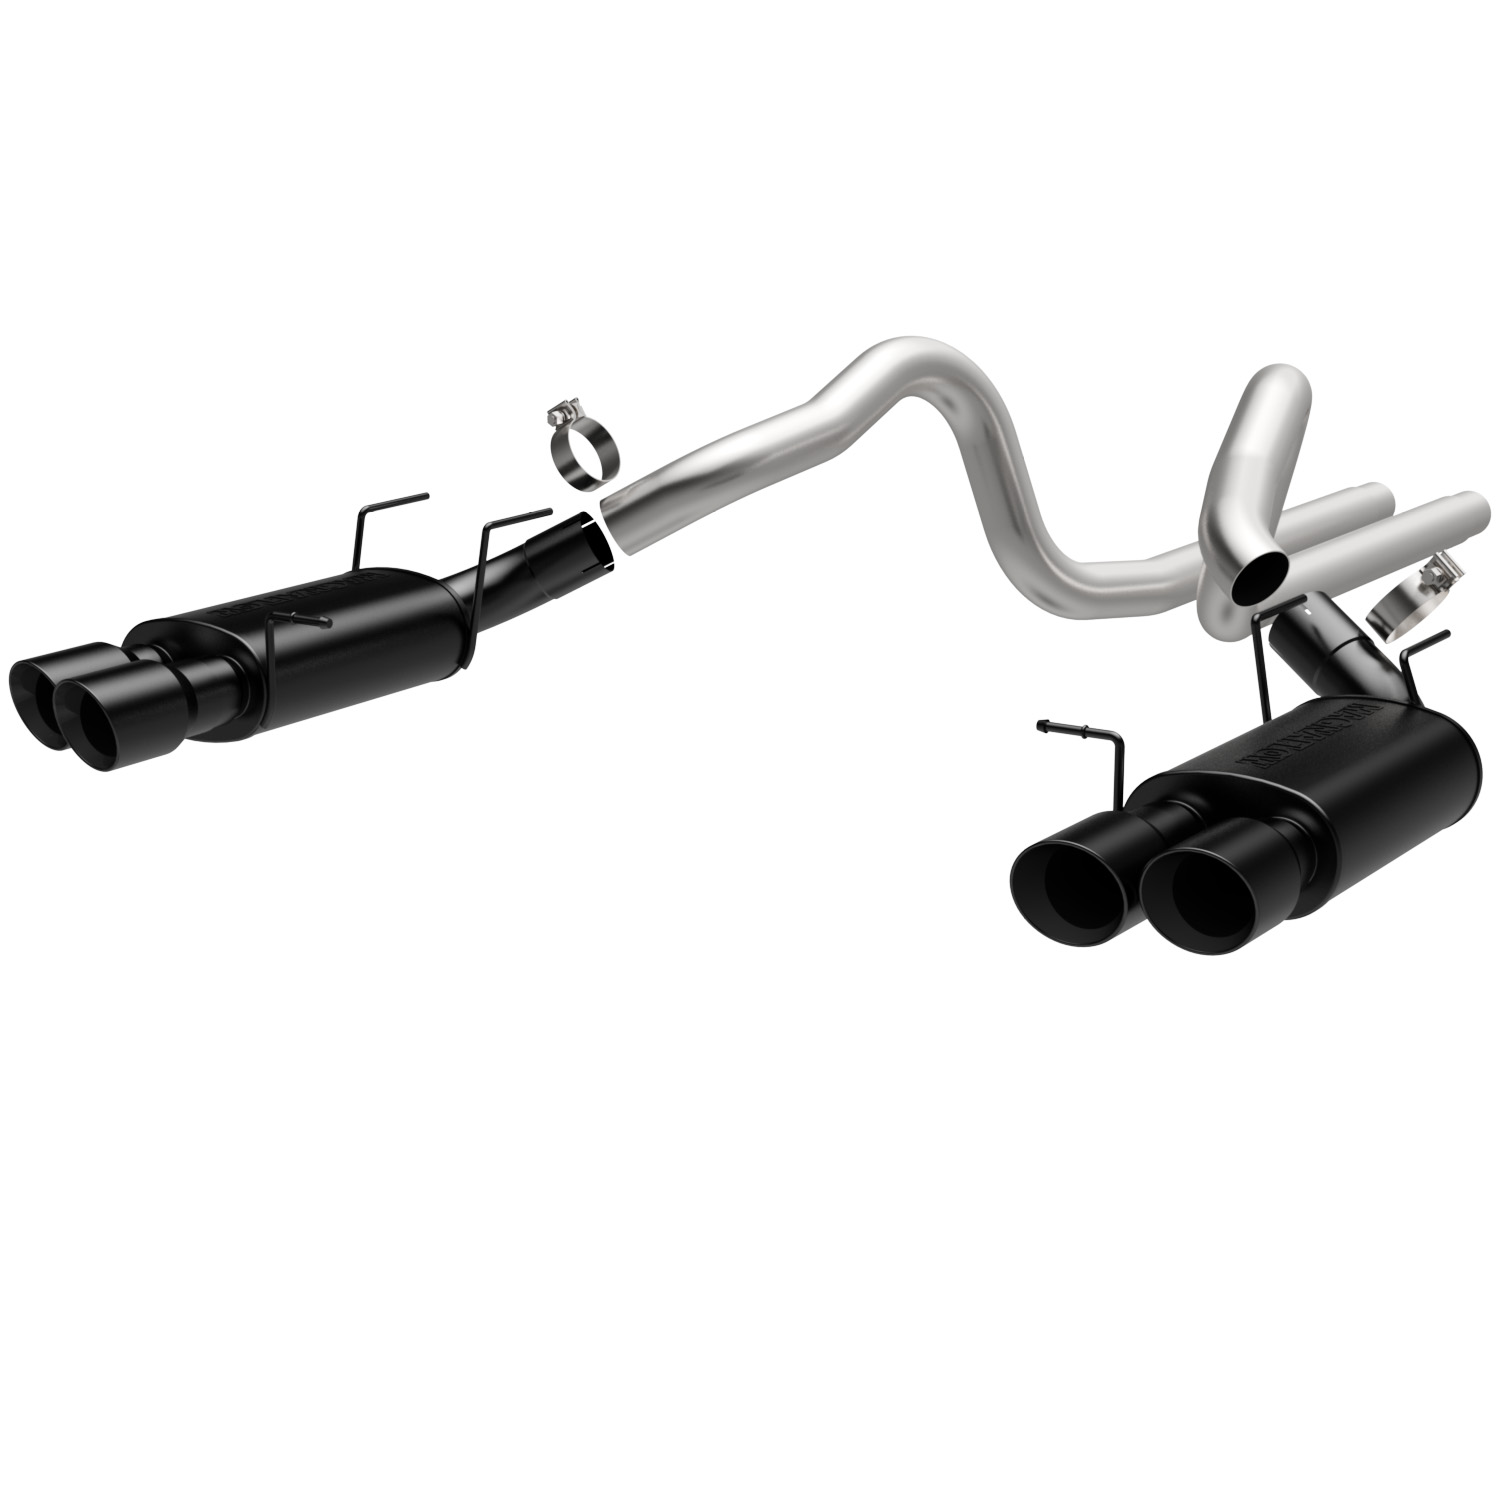 Street Series Cat-Back Exhaust System 2013-2014 Mustang Shelby GT500 5.8L V8